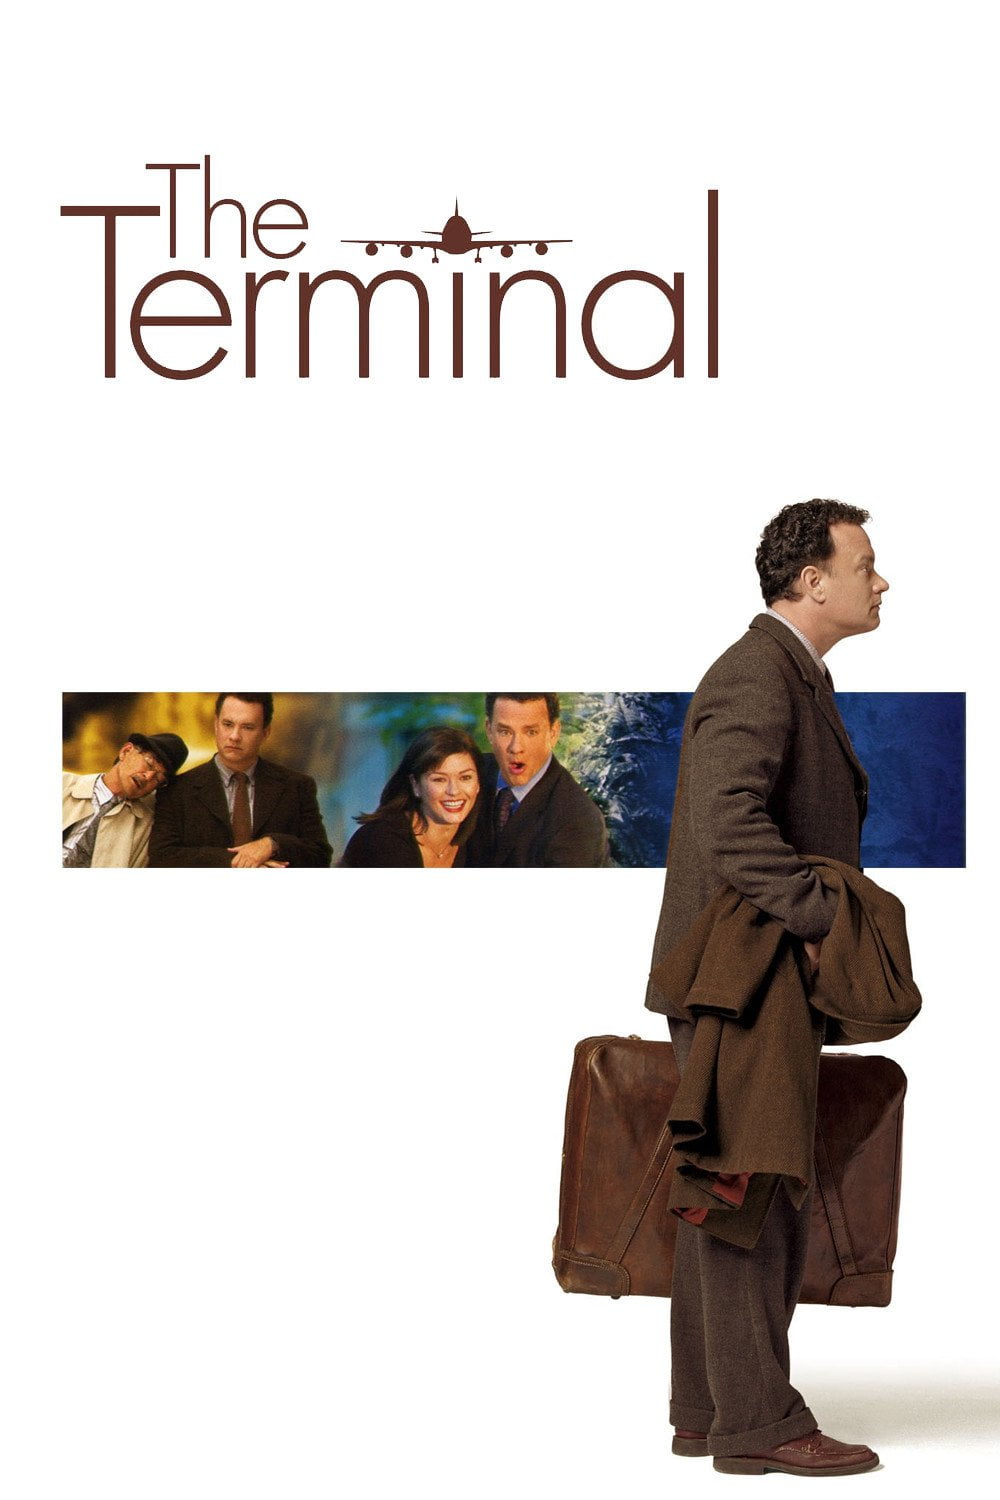 Poster for the filmen "The Terminal"